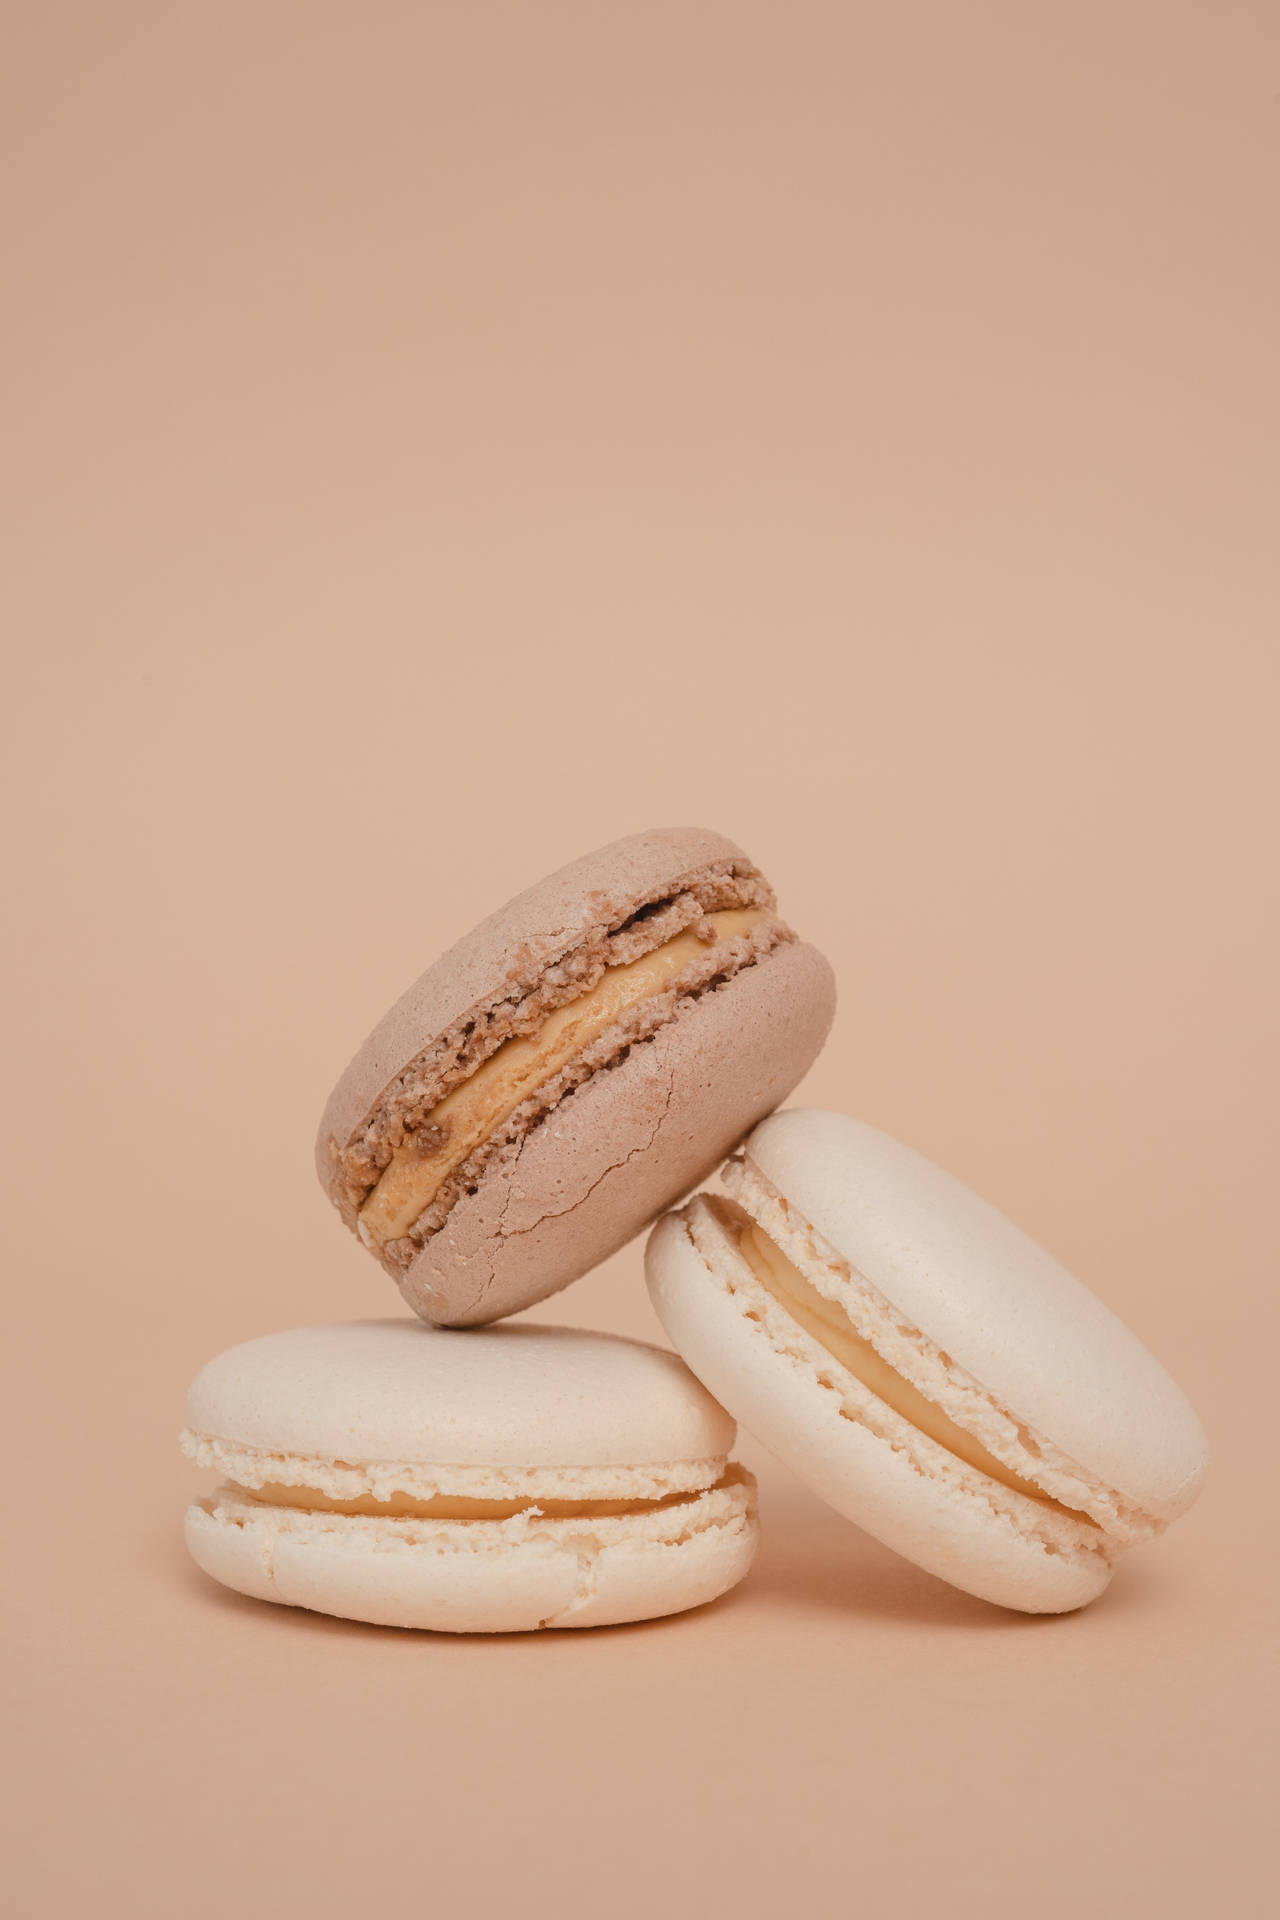 Solid Pastel Color Brown Macaroon Background